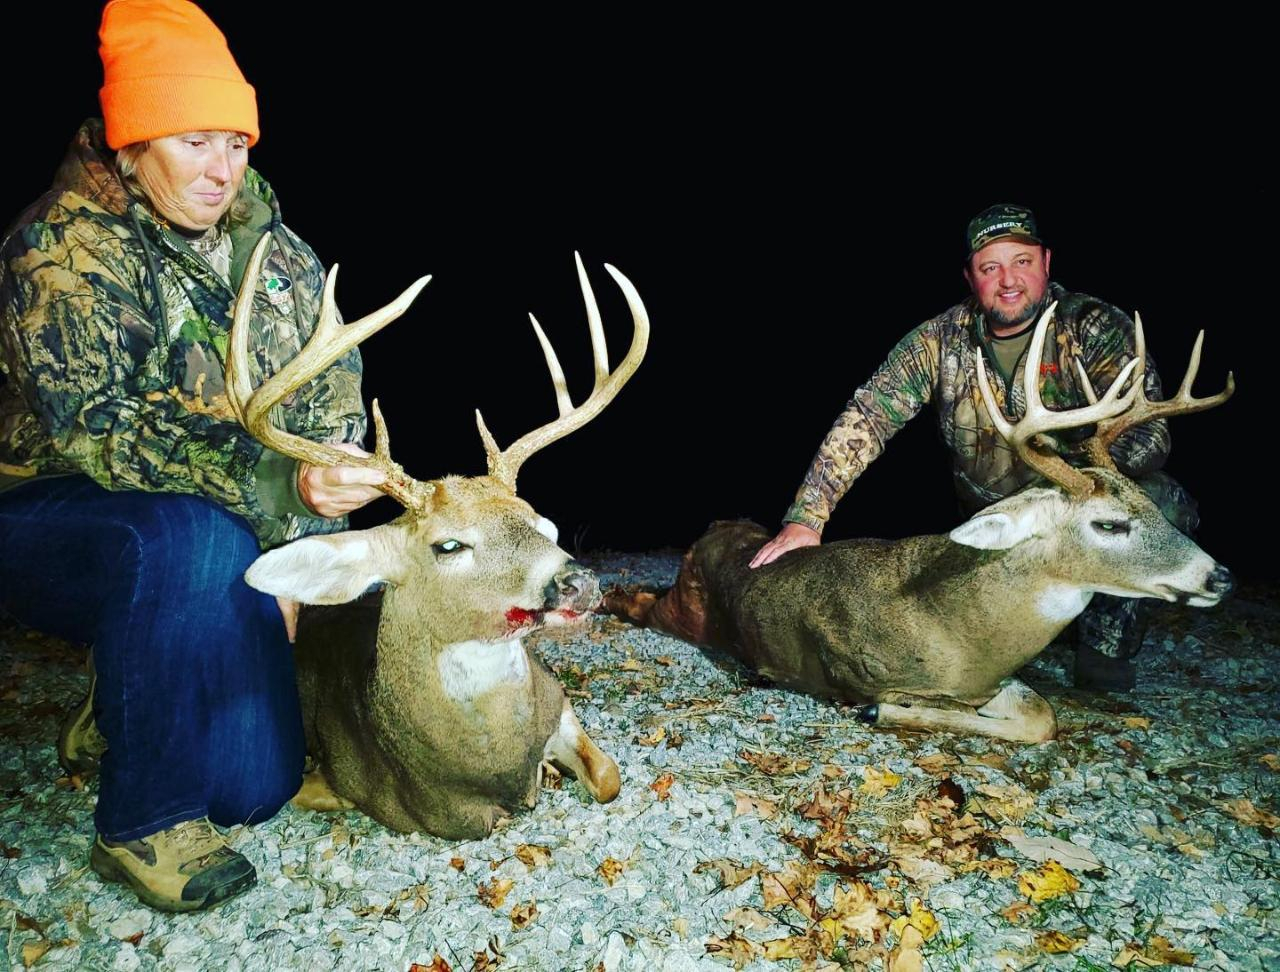 West Camp Indiana 5 Day 6 Night Rut Bow Hunt - Whitetail